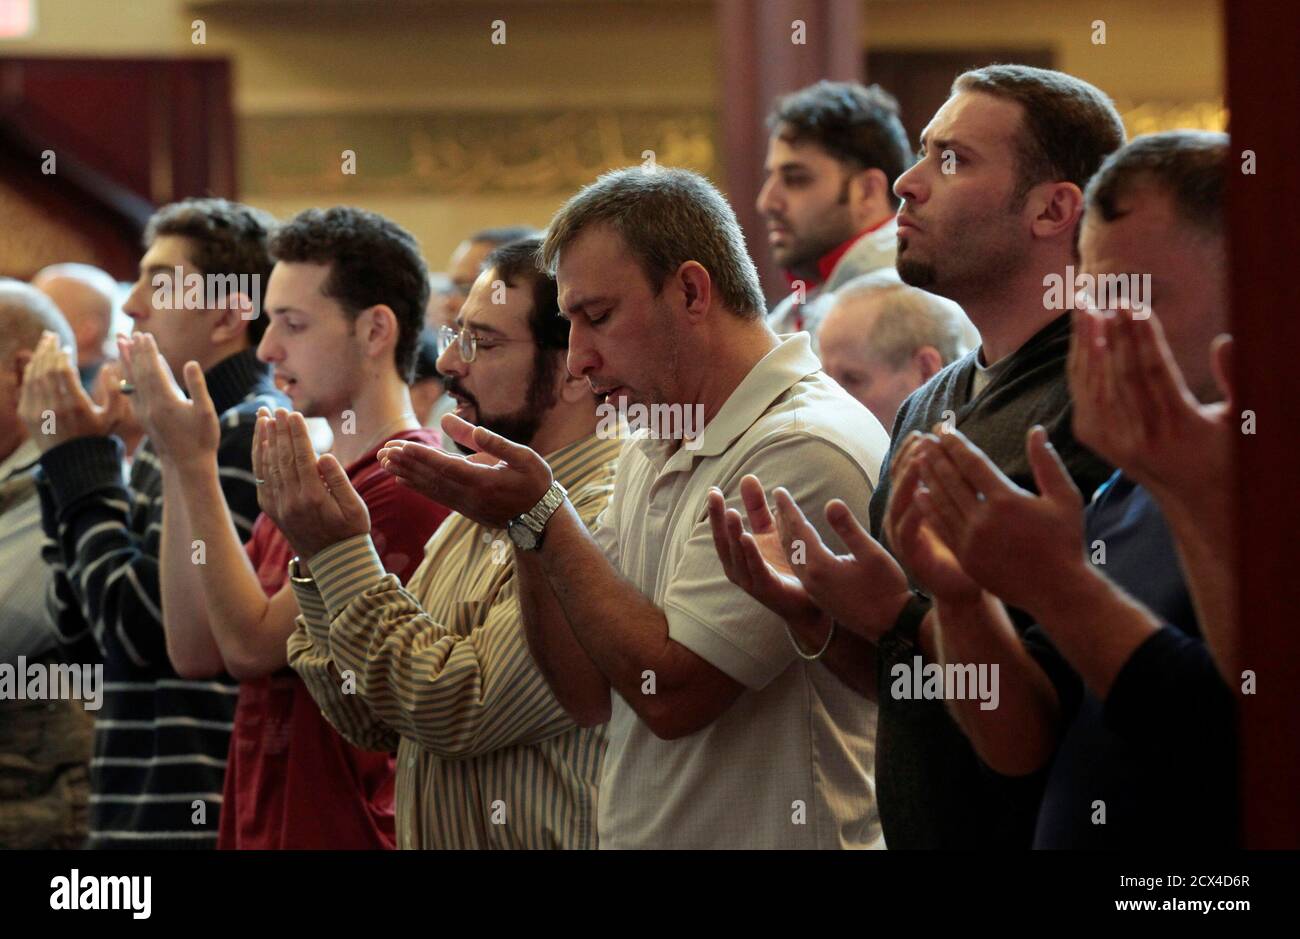 Muslim-American men pray during afternoon prayers at the Islamic Center of America before attending a peaceful  interfaith rally against the violence triggered by a privately made anti-Islam video in Dearborn, Michigan September 21, 2012.    REUTERS/Rebecca Cook  (UNITED STATES - Tags: RELIGION CIVIL UNREST) Stock Photo